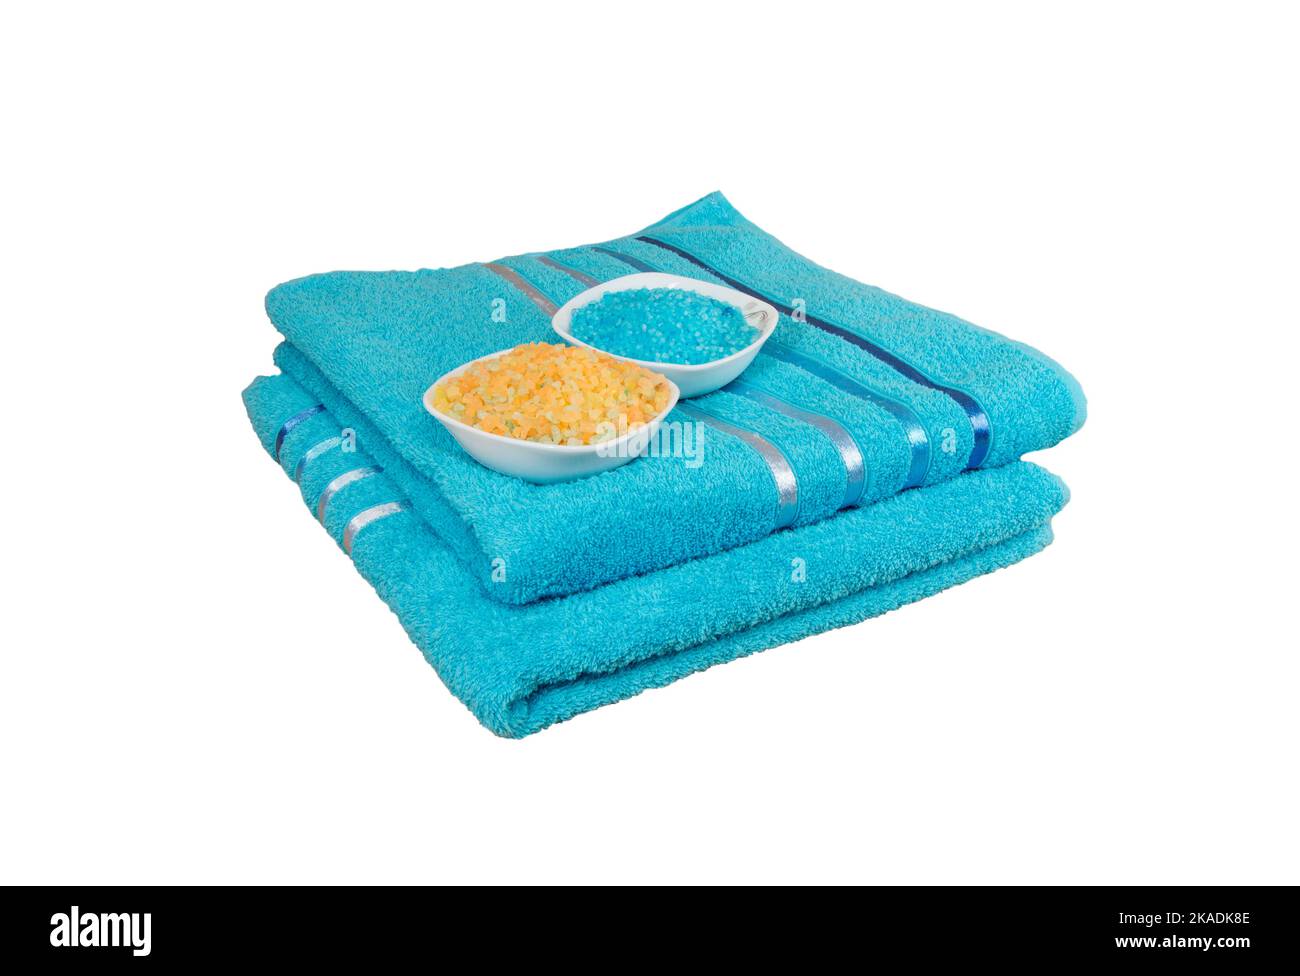 sea salt Spa and folded stack of blue towels isolated on white background. Stock Photo